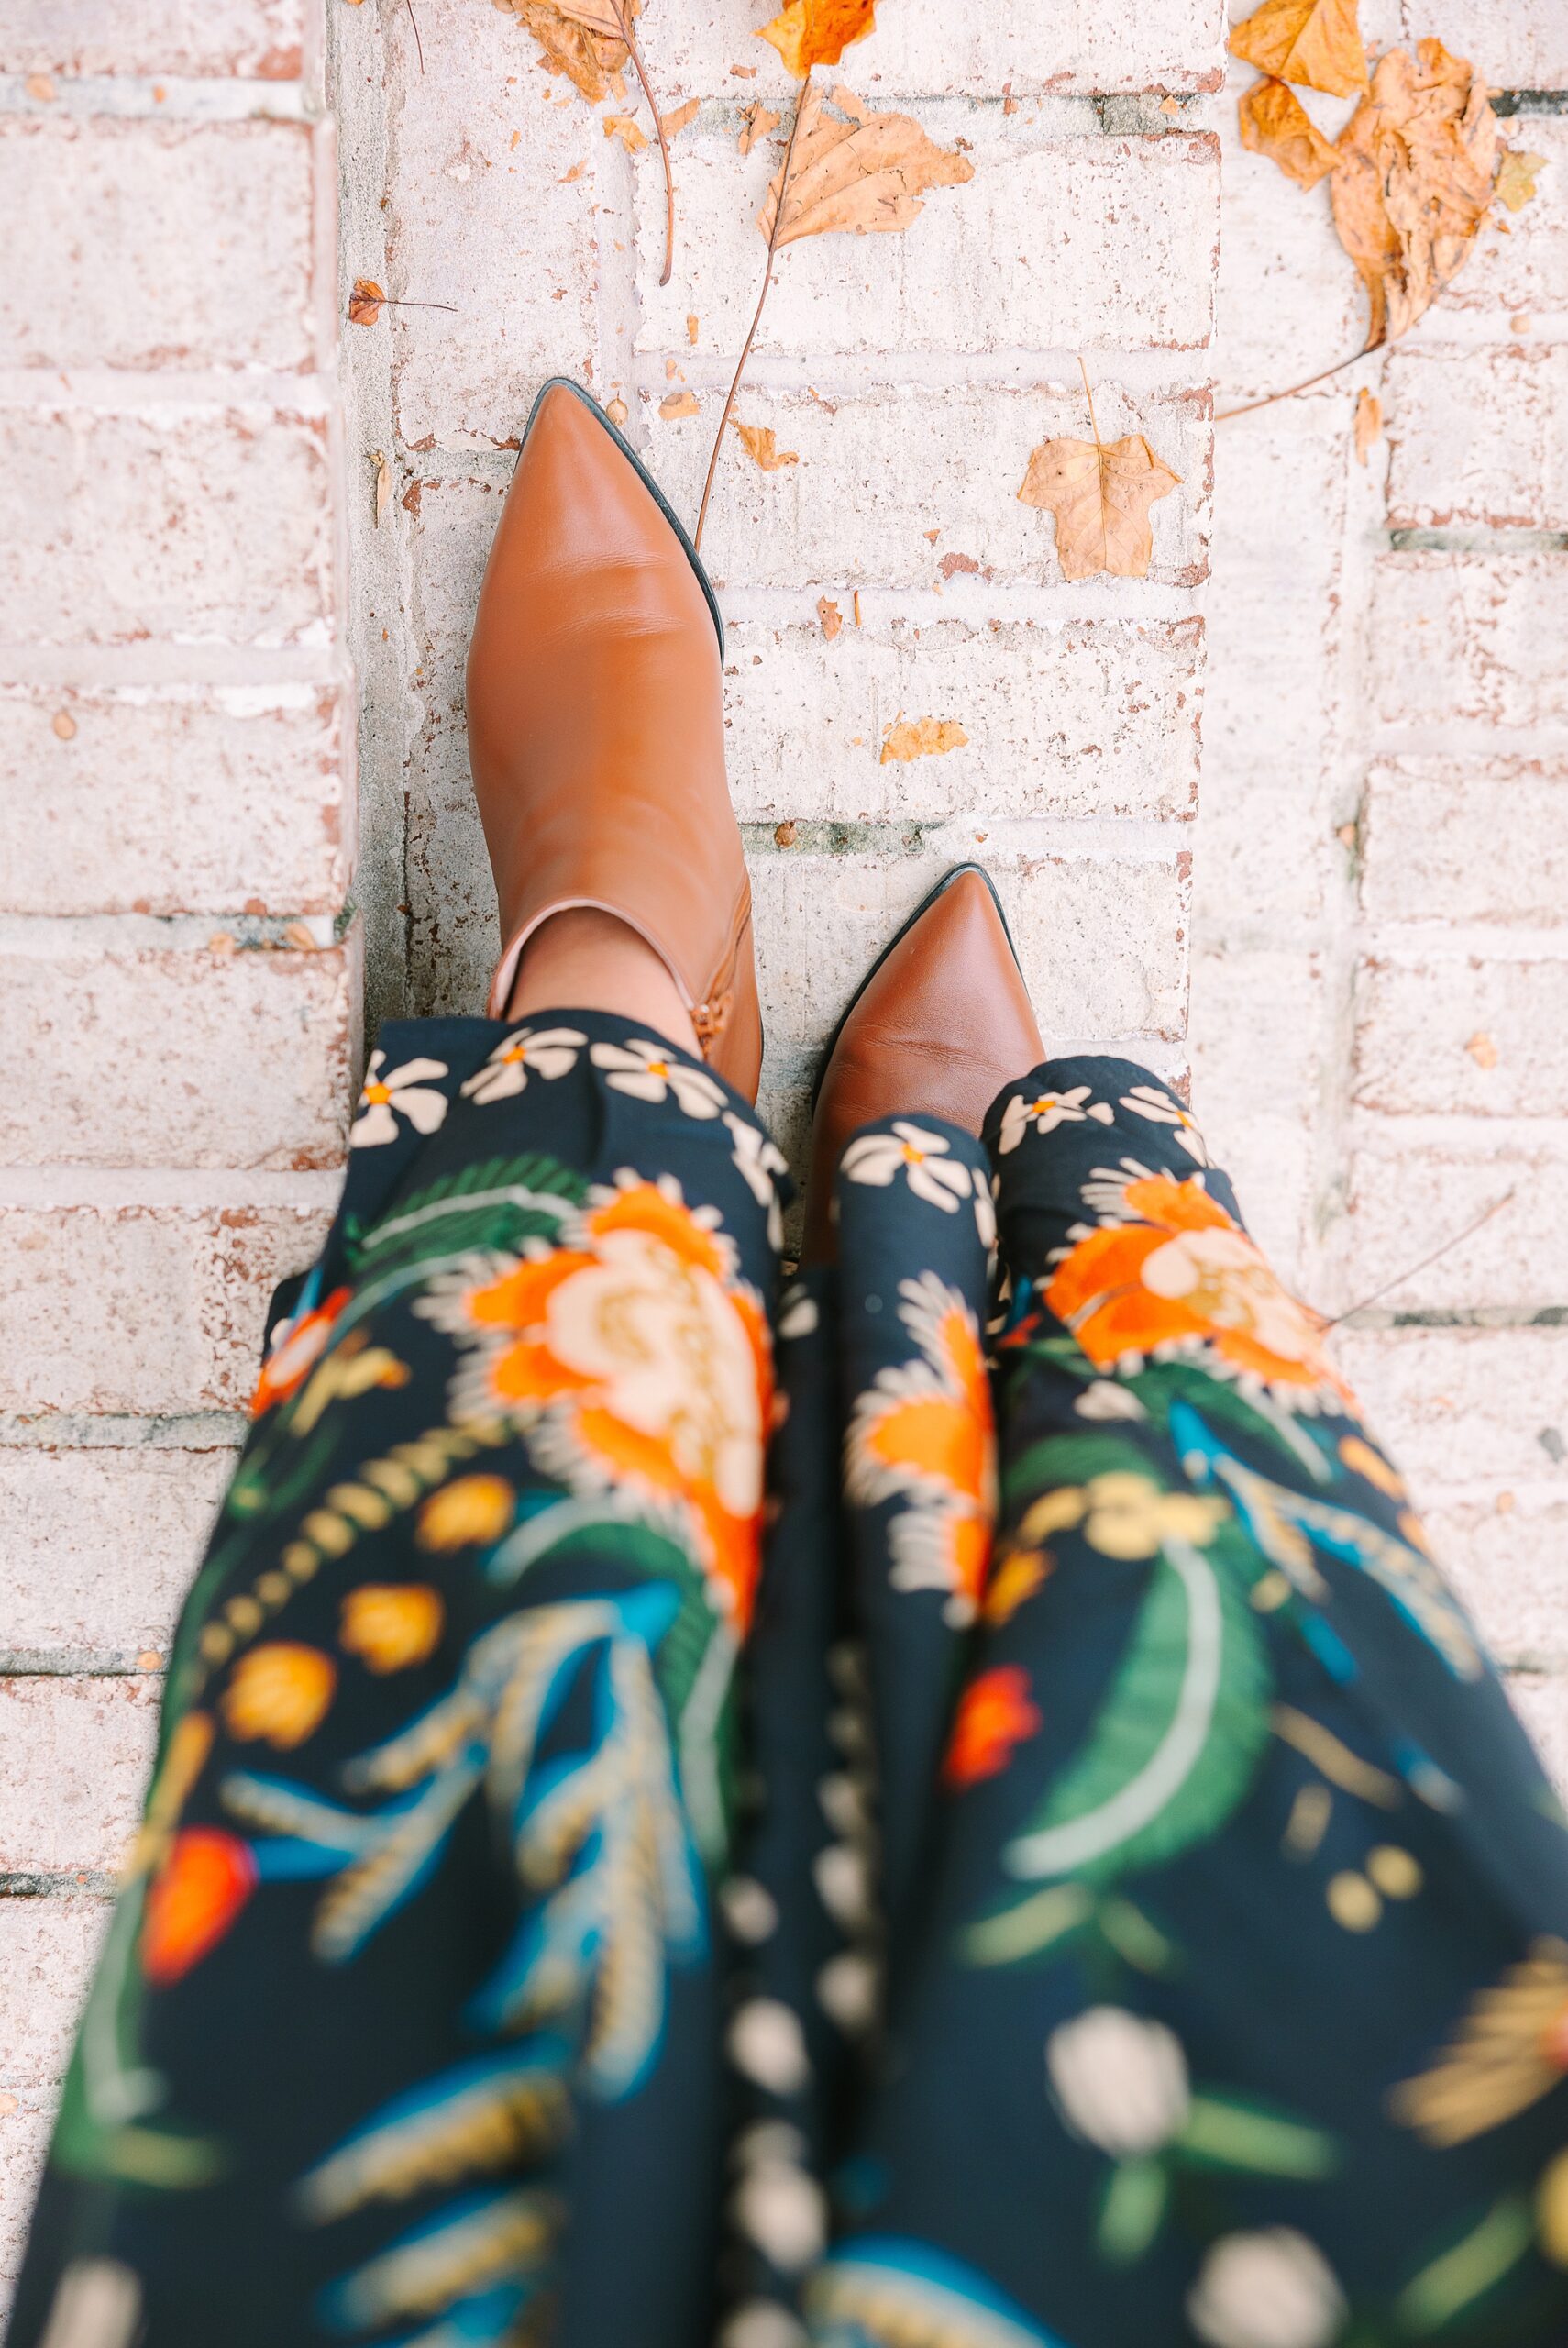 black dress with floral pattern with brown boots